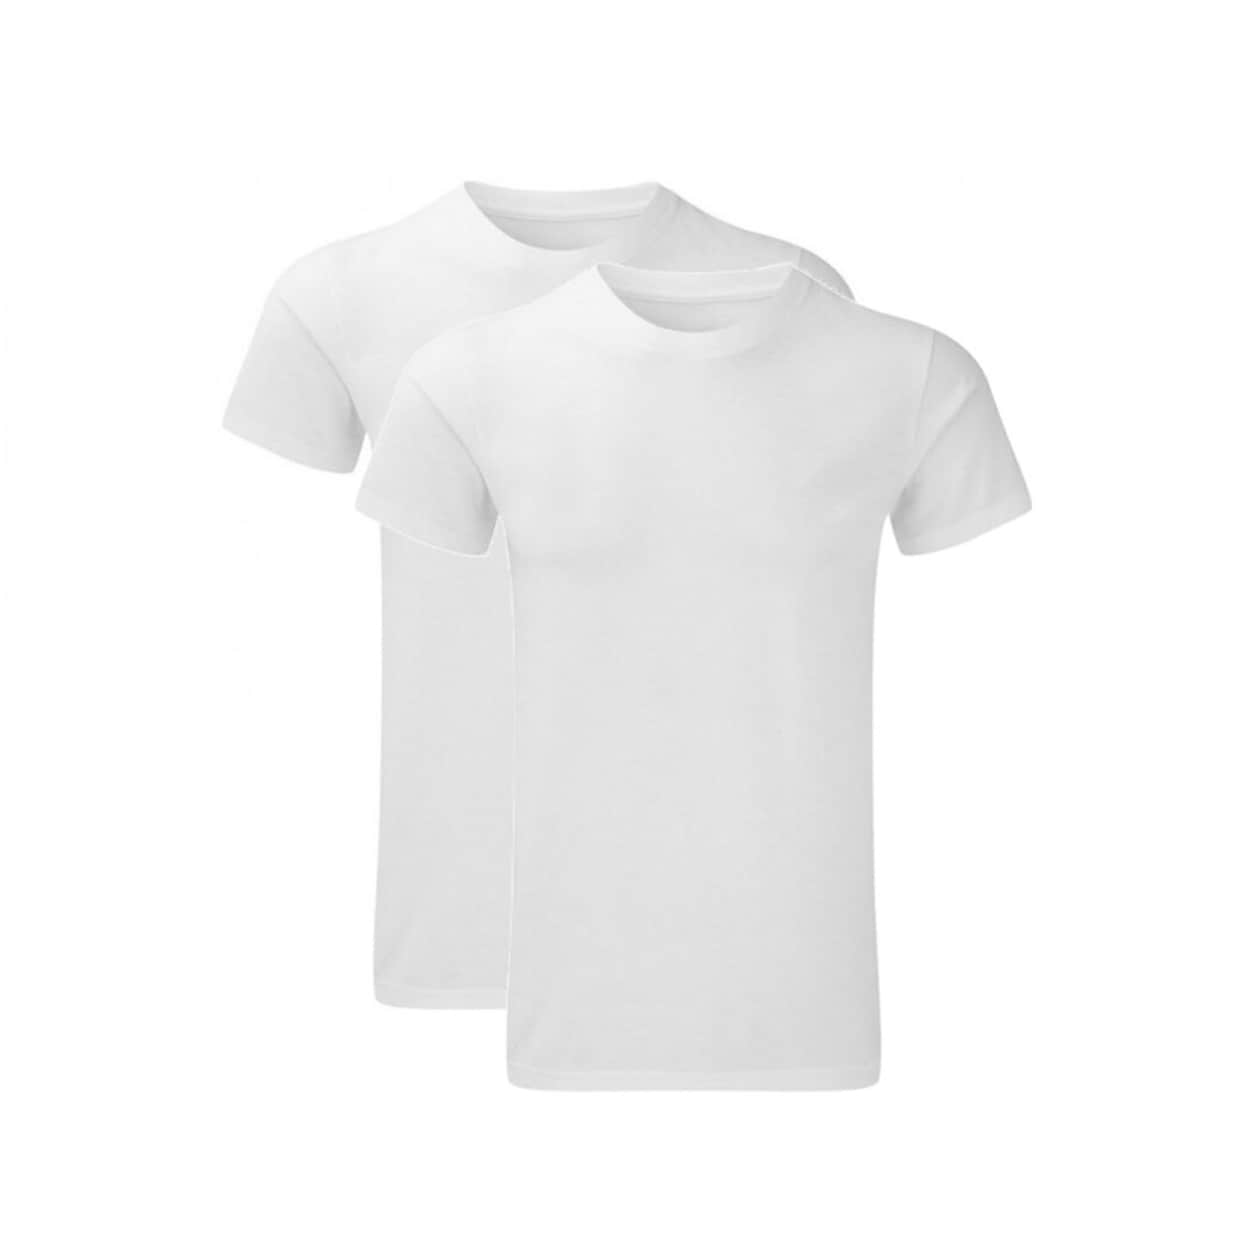 russell training fit fresh force shirt